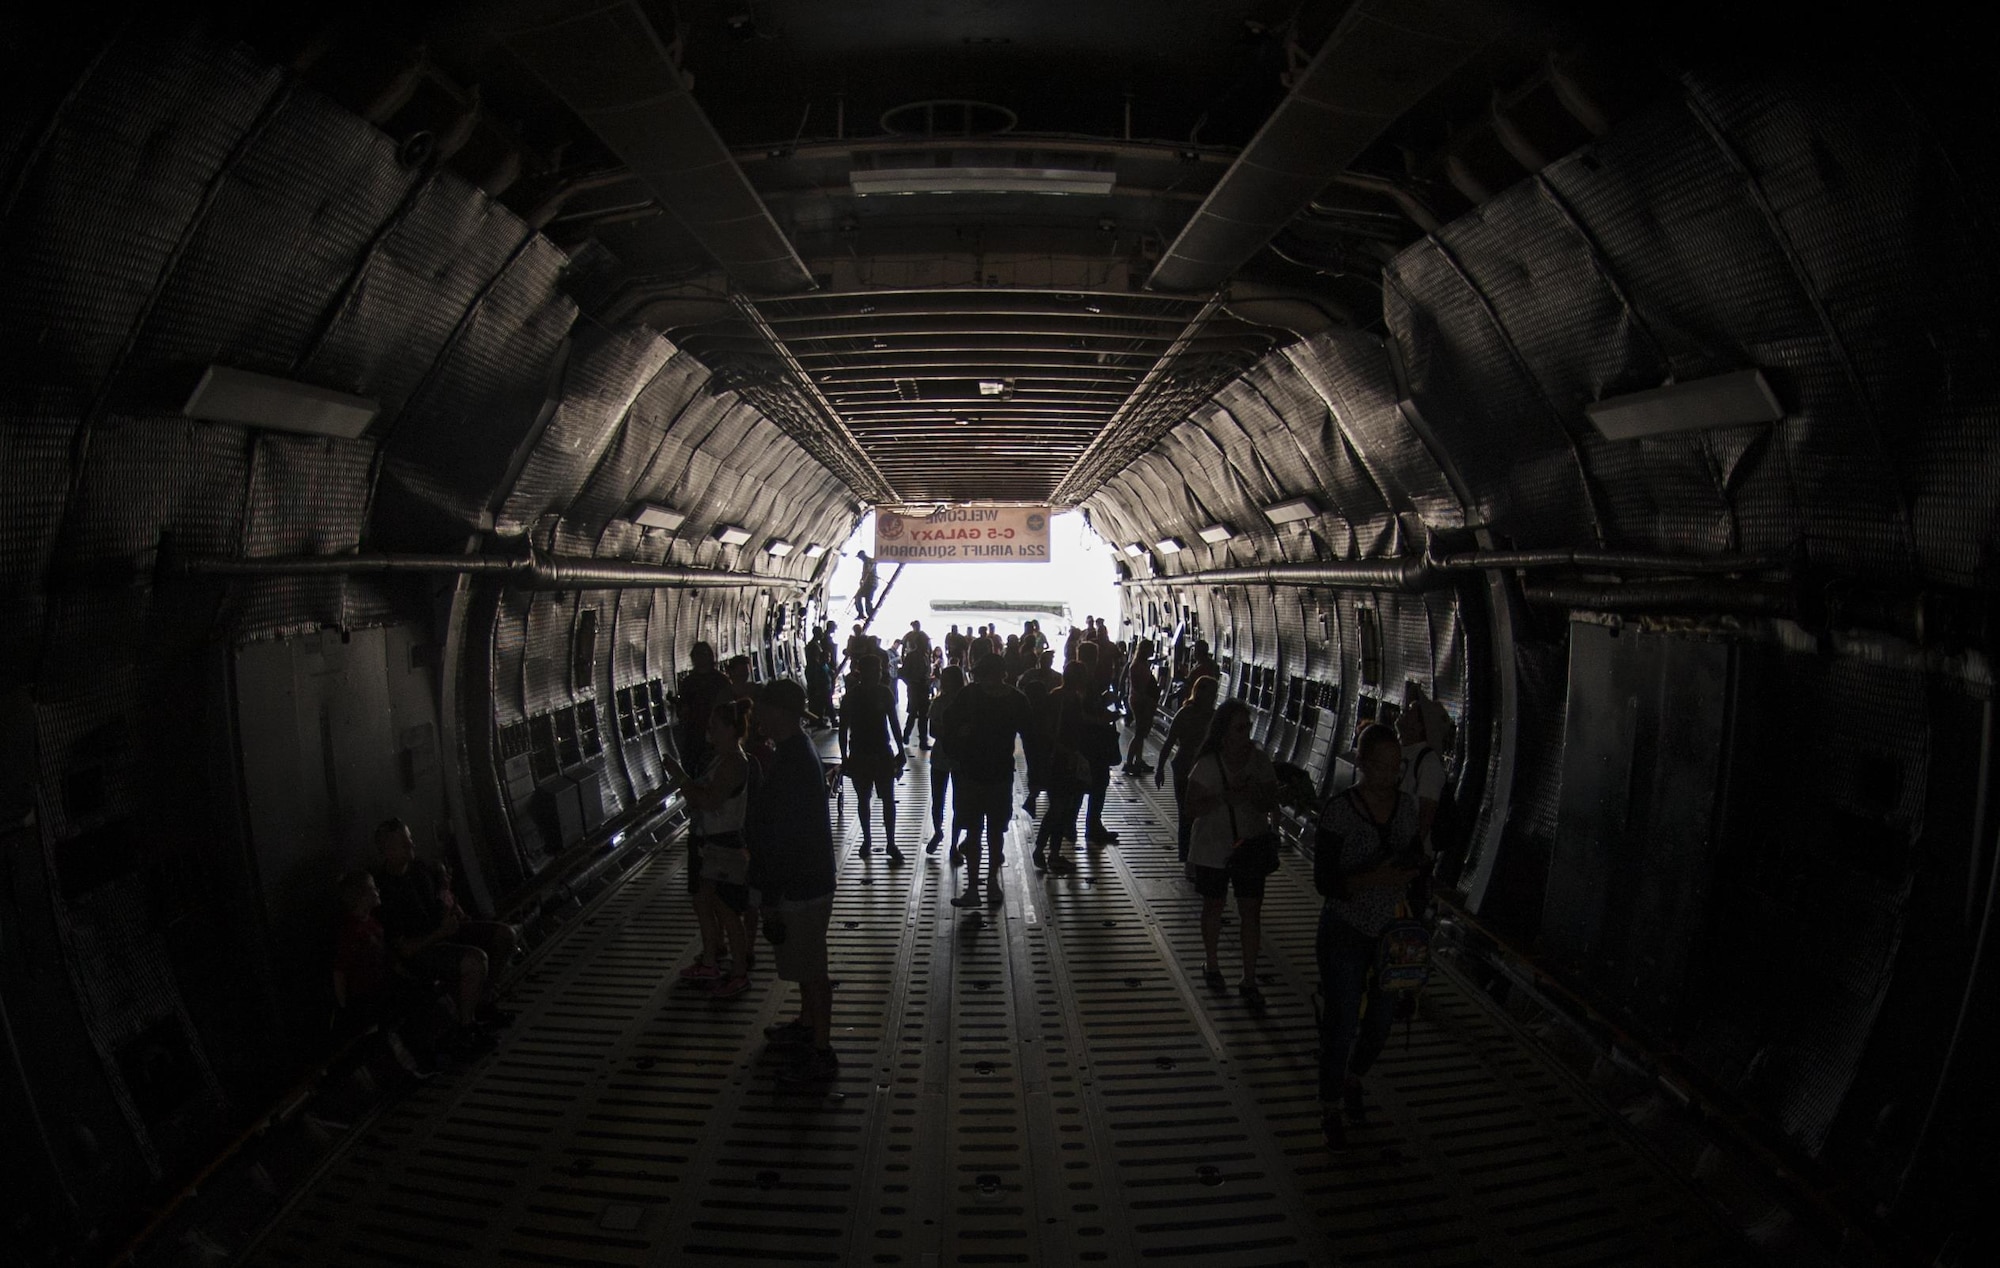 Guests of the Aviation Nation air show walk through a C-5 Galaxy during the Aviation Nation air show on Nellis Air Force Base., Nov. 12, 2016. The C-5 can carry a fully equipped combat-ready military unit to any point in the world on short notice and then provide the supplies required to help sustain the fighting force. (U.S. Air Force photo by Airman 1st Class Kevin Tanenbaum/Released)